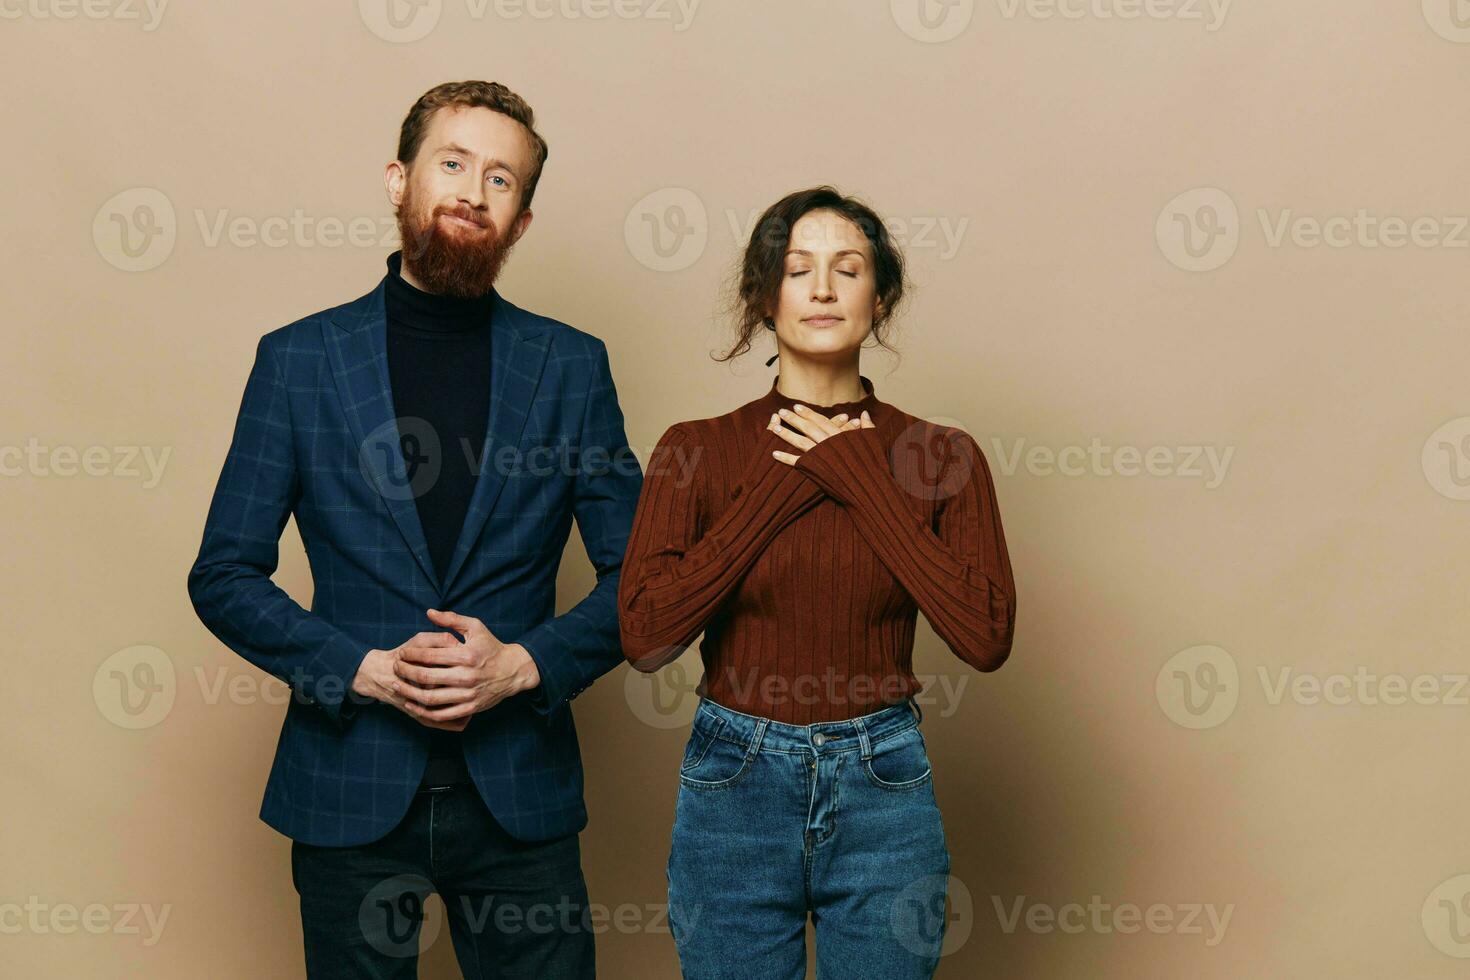 Man and woman couple in a relationship smile and interaction on a beige background in a real relationship between people photo